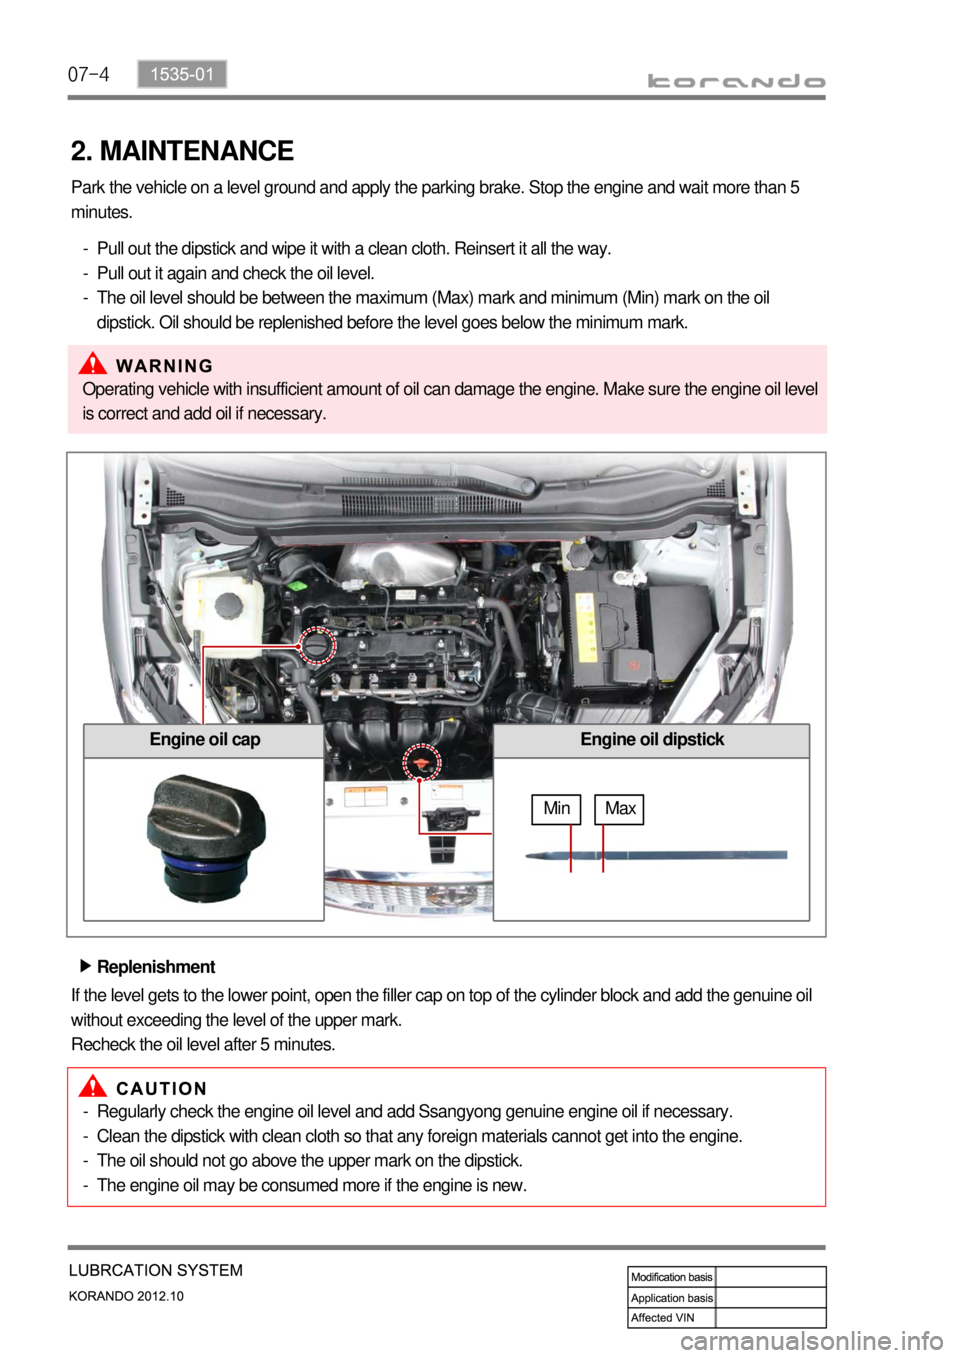 SSANGYONG KORANDO 2012  Service Manual 07-4
2. MAINTENANCE
Park the vehicle on a level ground and apply the parking brake. Stop the engine and wait more than 5 
minutes.
Pull out the dipstick and wipe it with a clean cloth. Reinsert it all